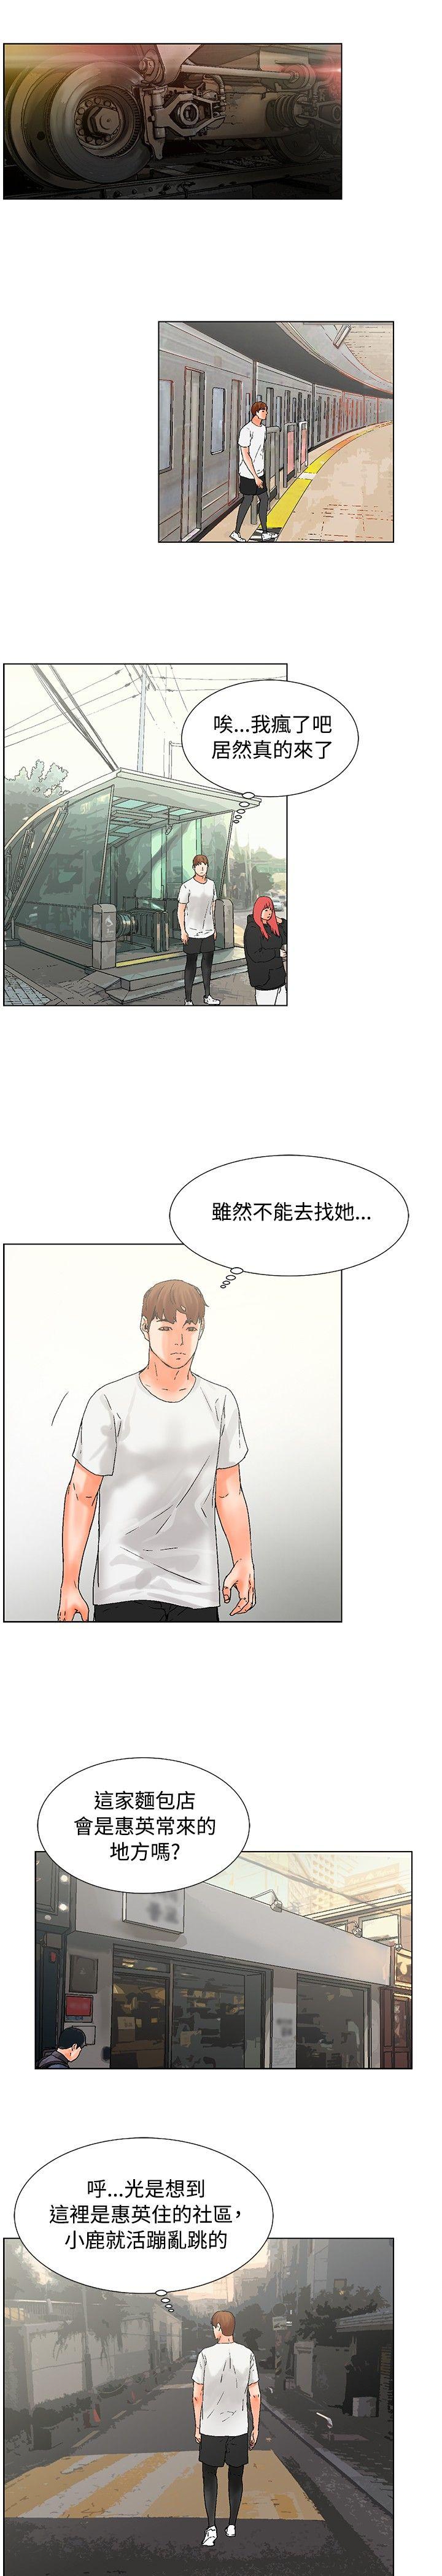 Massages 朋友的妻子：有妳在的家 Pain - Page 11